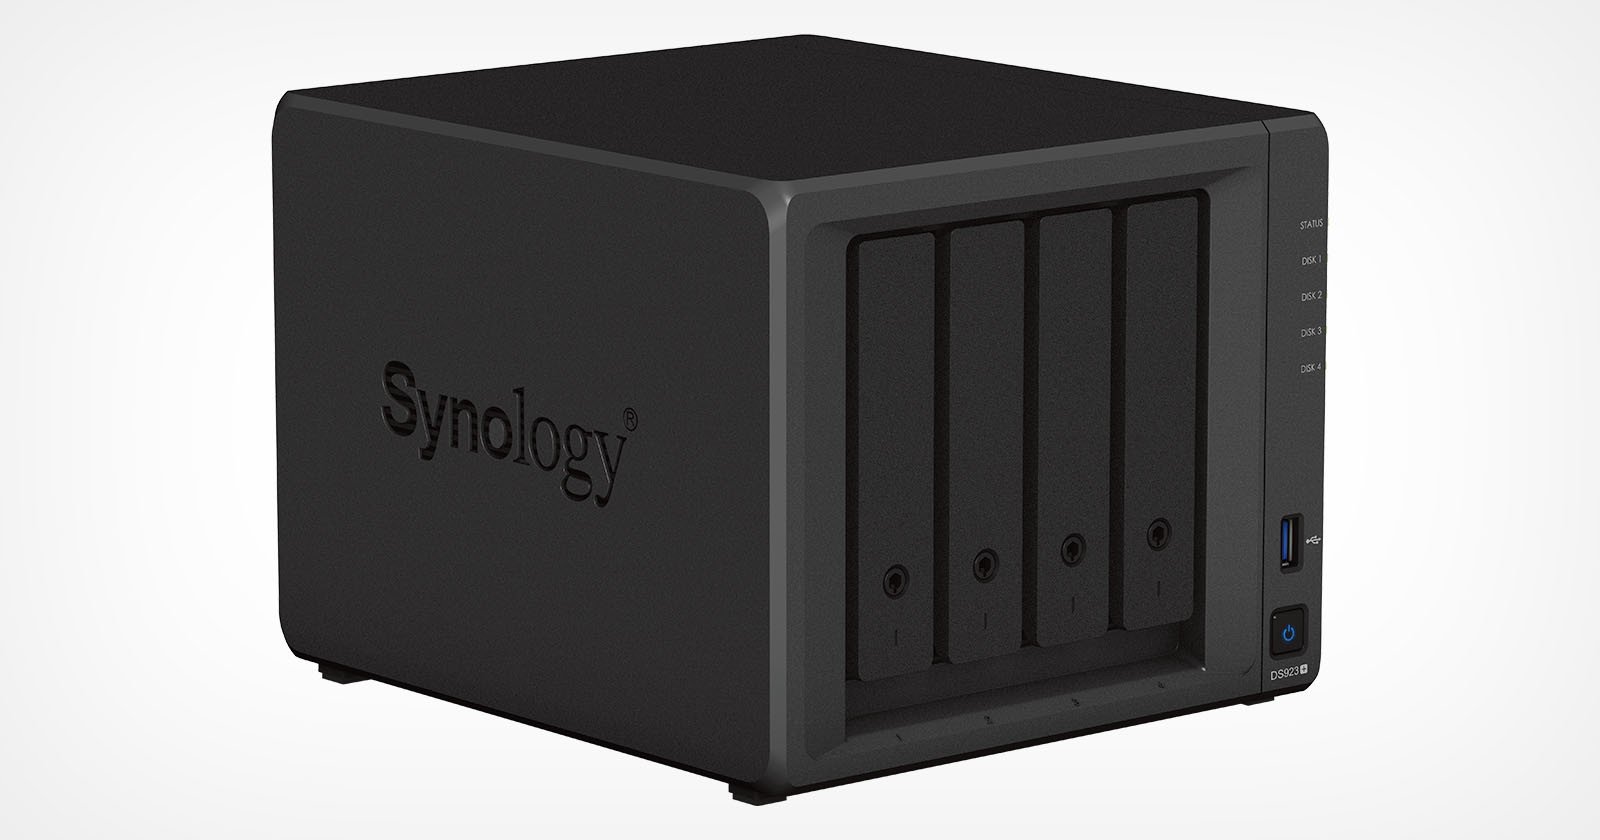  synology ds923 4-bay compact nas home 